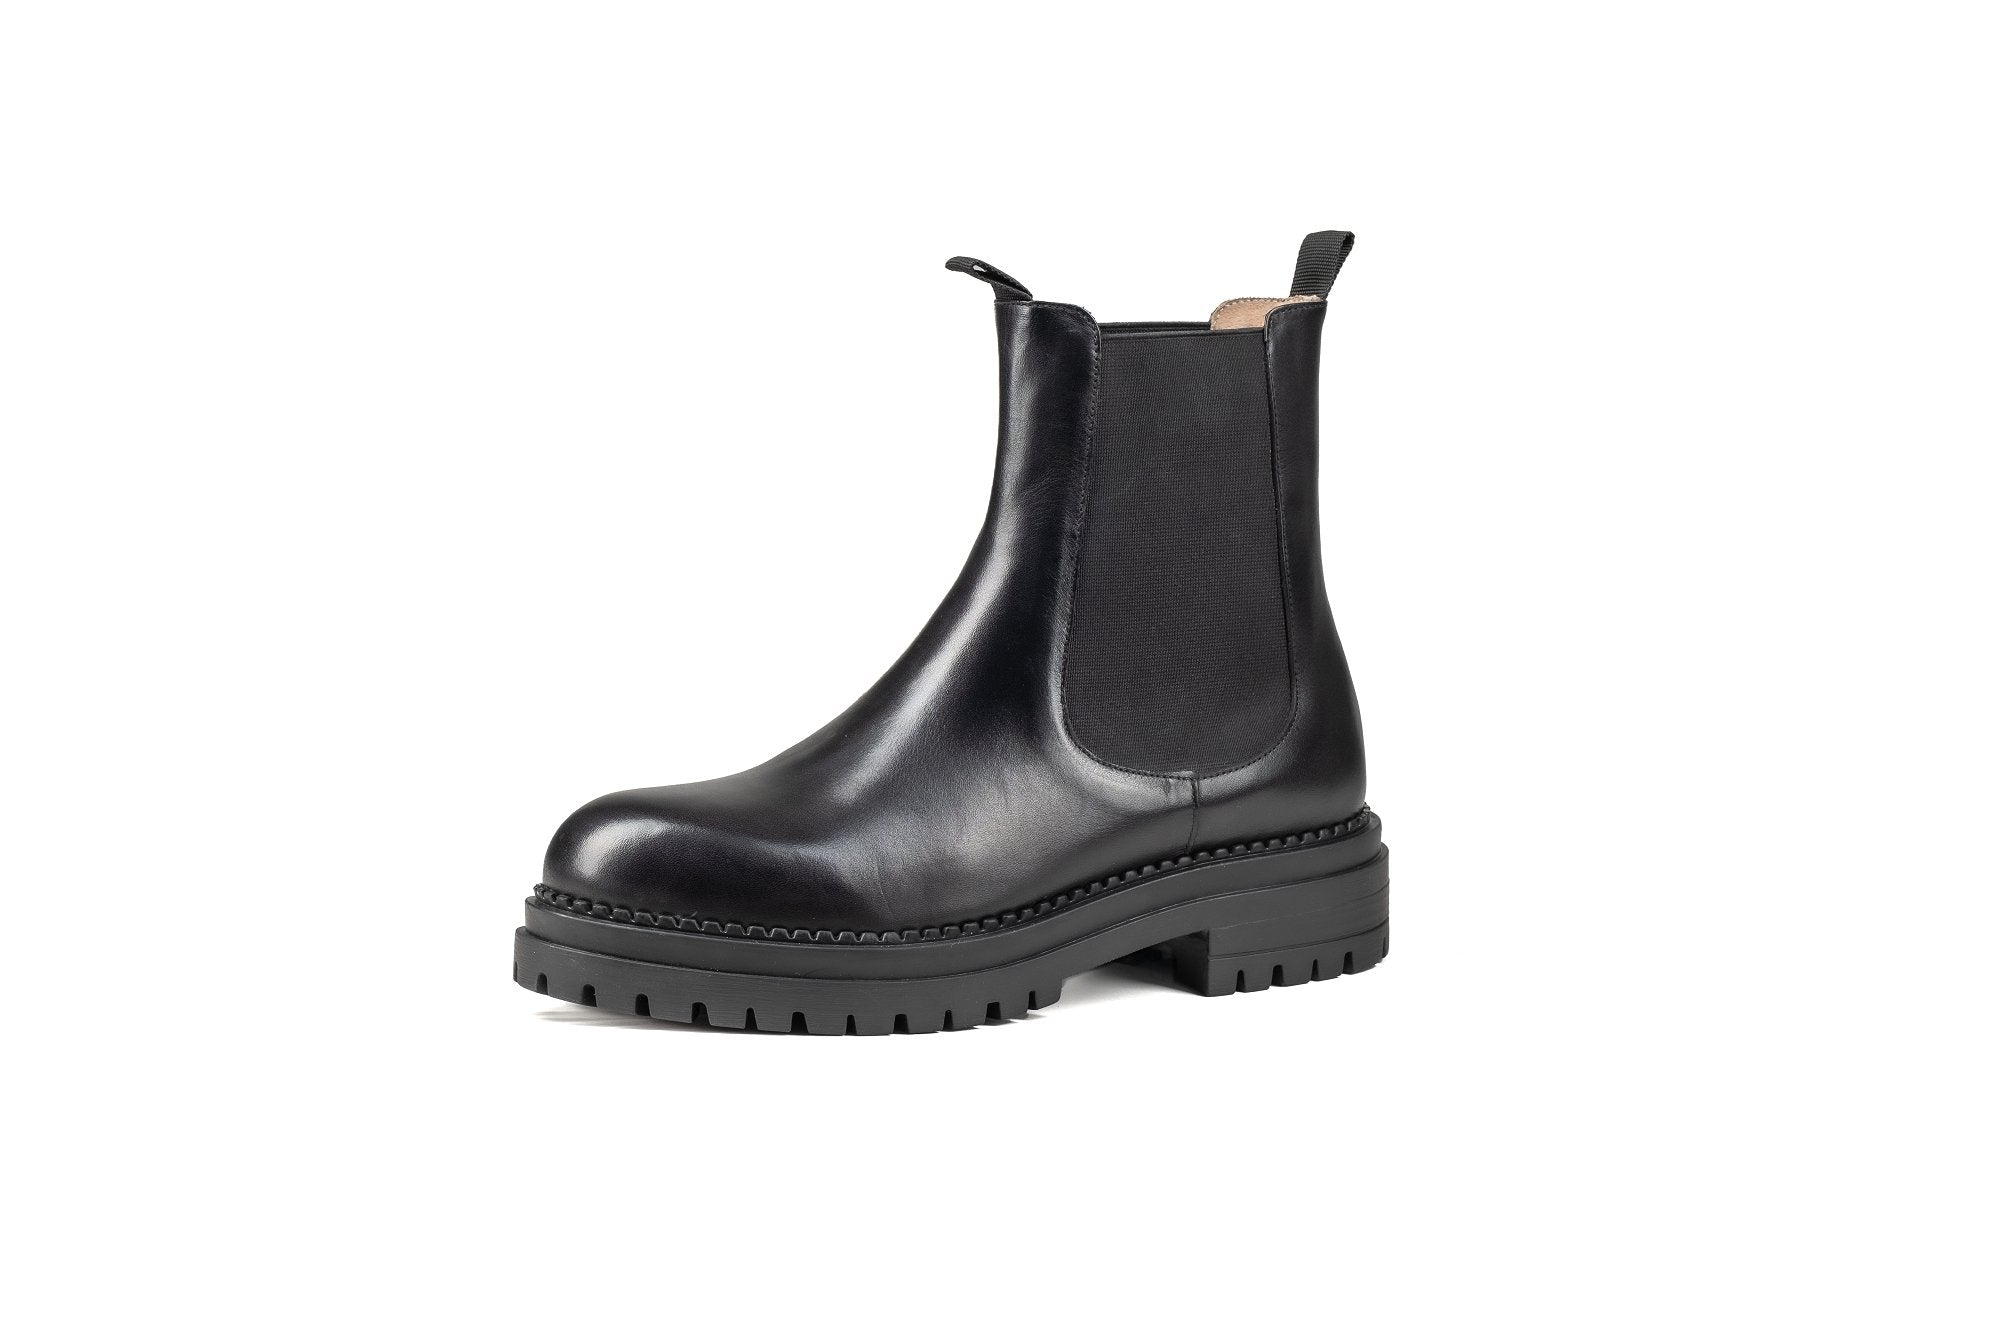 Dev Boot Black Boots by Sole Shoes NZ AB14-36